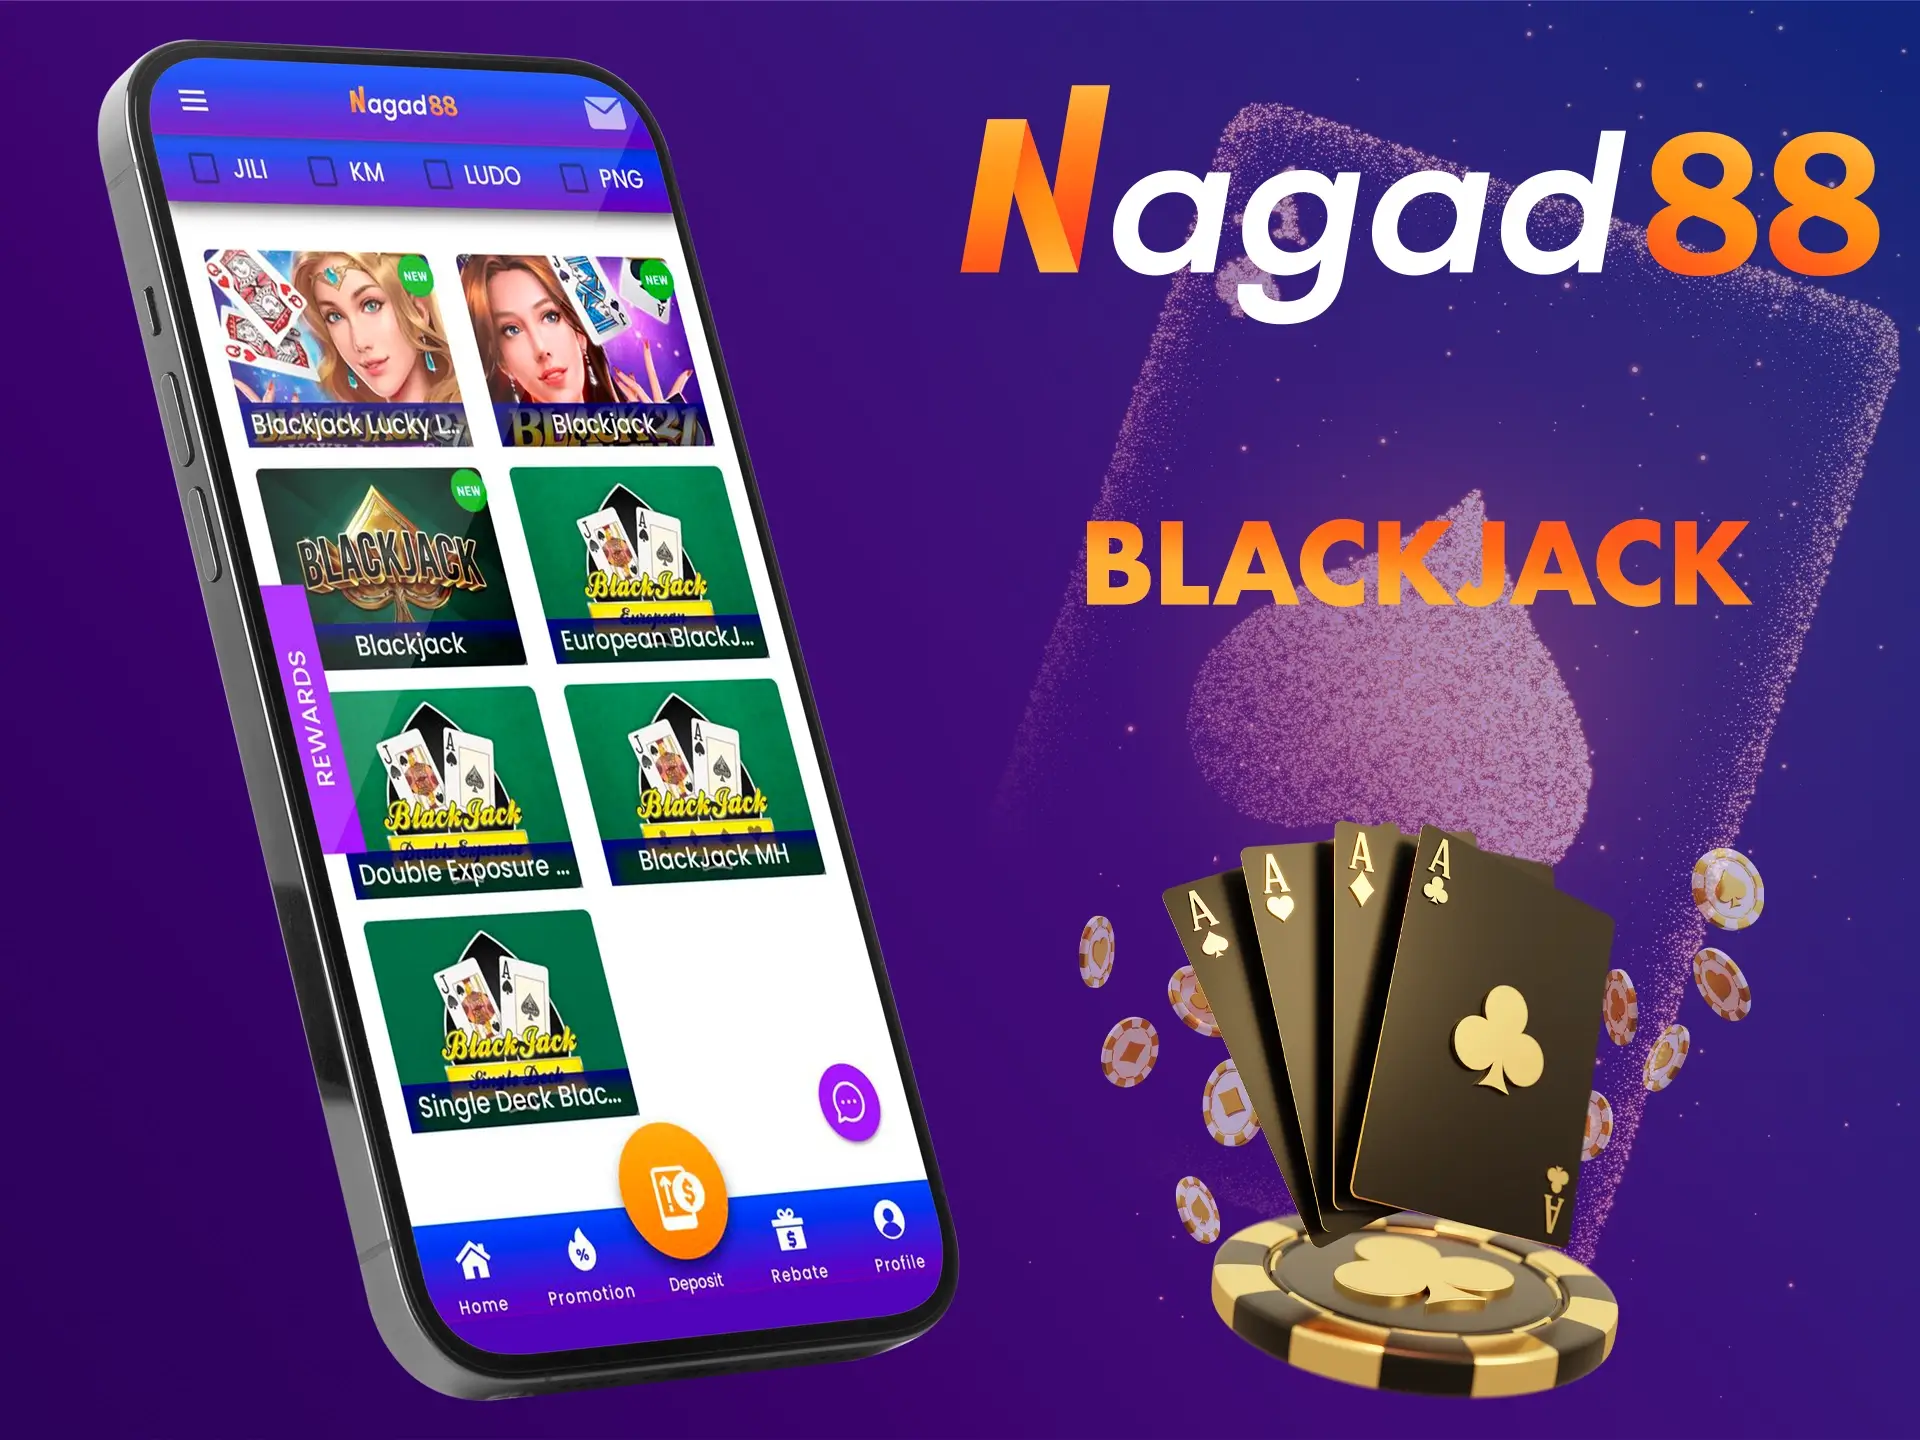 Show off your skills in the Blackjack game at Nagad88.